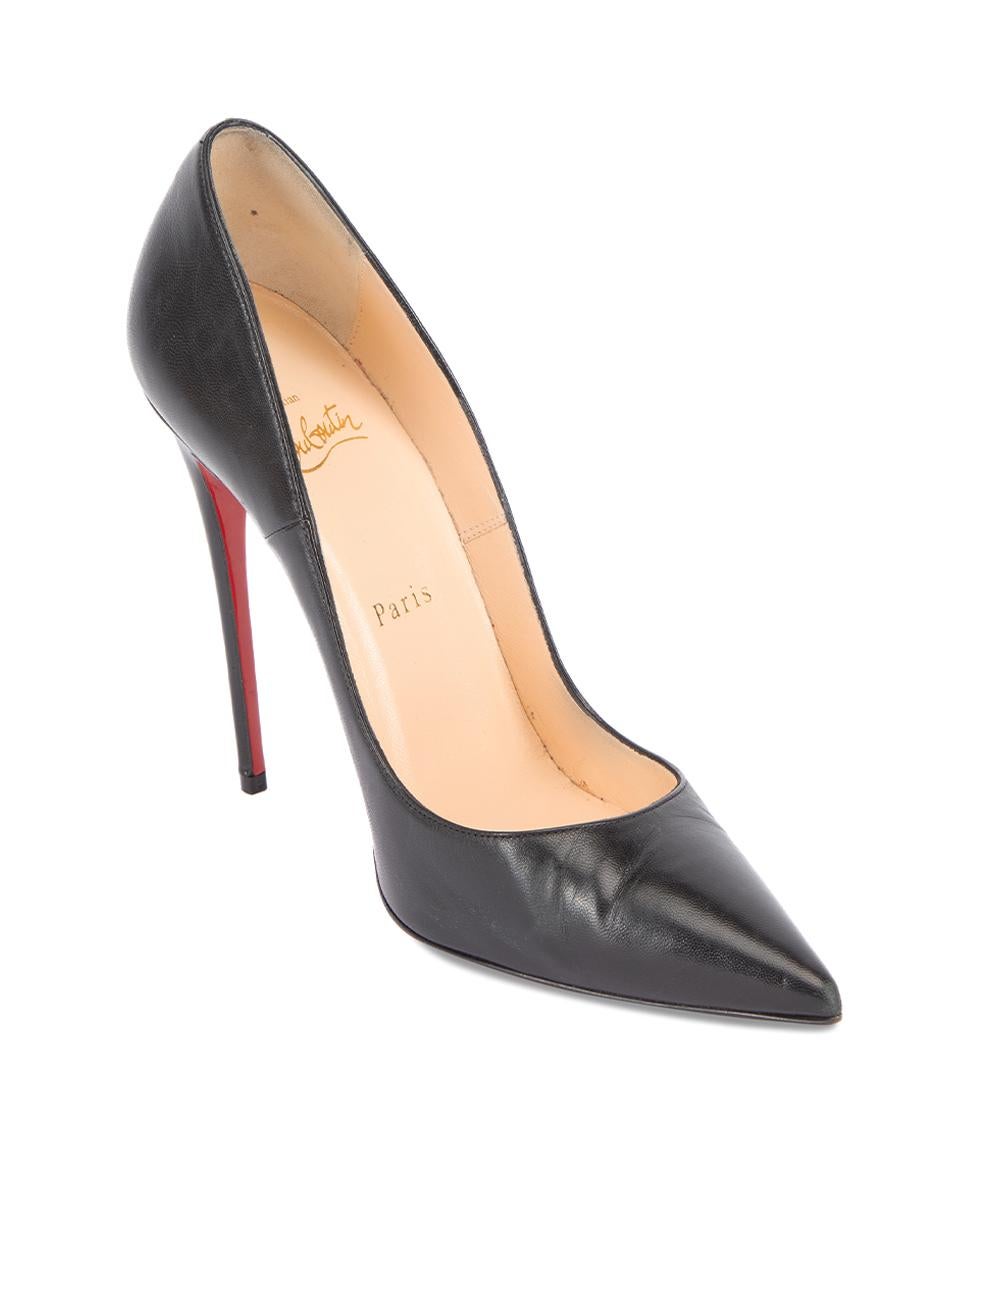 CONDITION is Very good. Minimal wear to heels is evident. Minimal wear to the the exterior leather at the vamp and there are scuffs to the toe point. There is also wear to the red bottoms on this used Christian Louboutin designer resale item. This